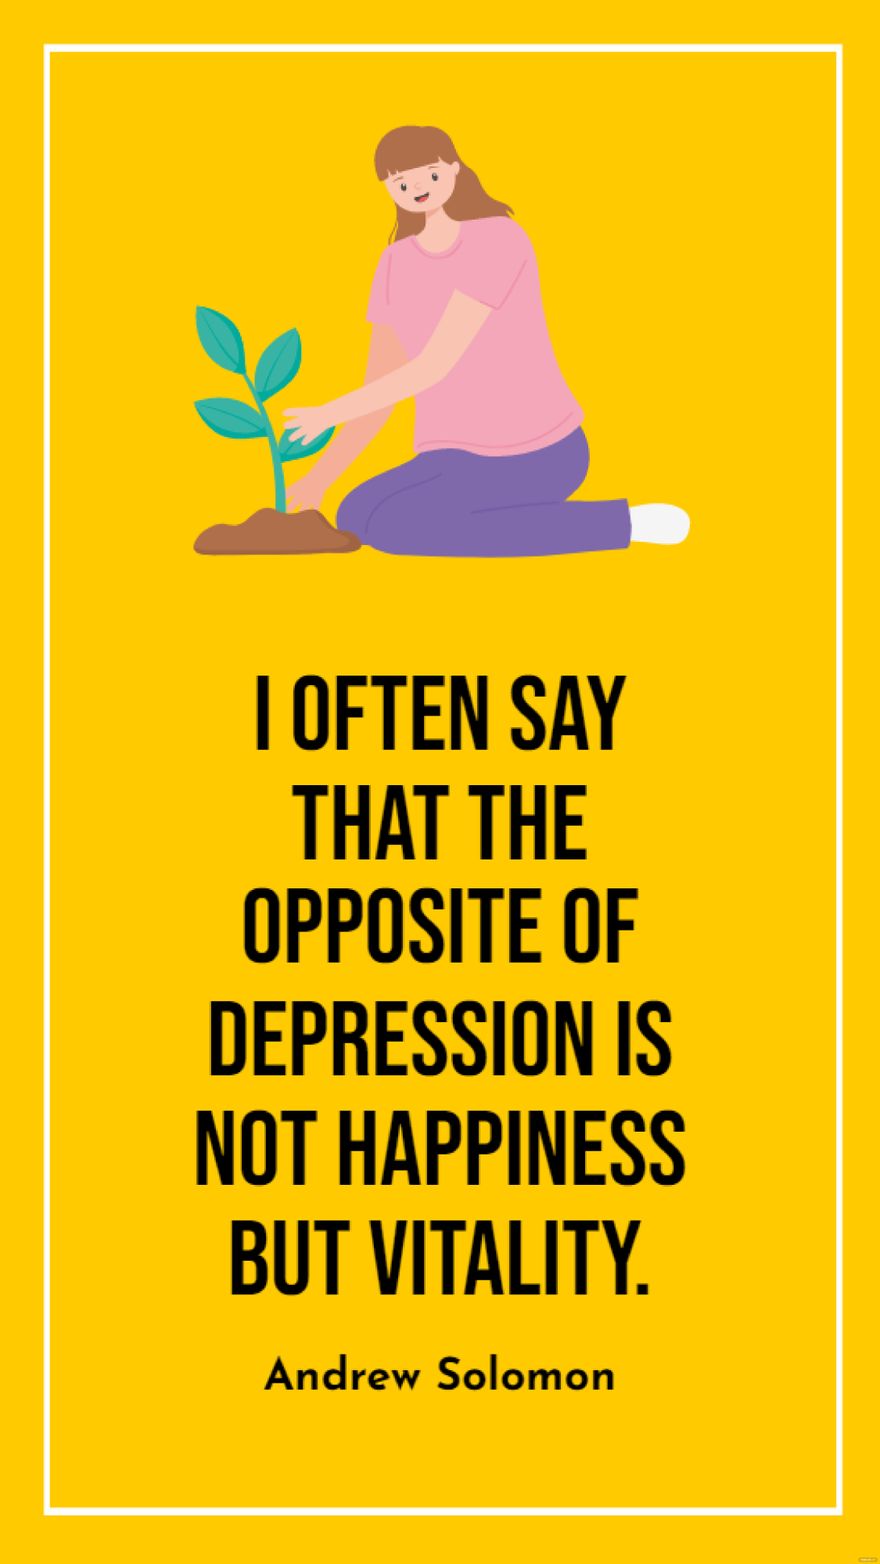 Andrew Solomon - I often say that the opposite of depression is not happiness but vitality.